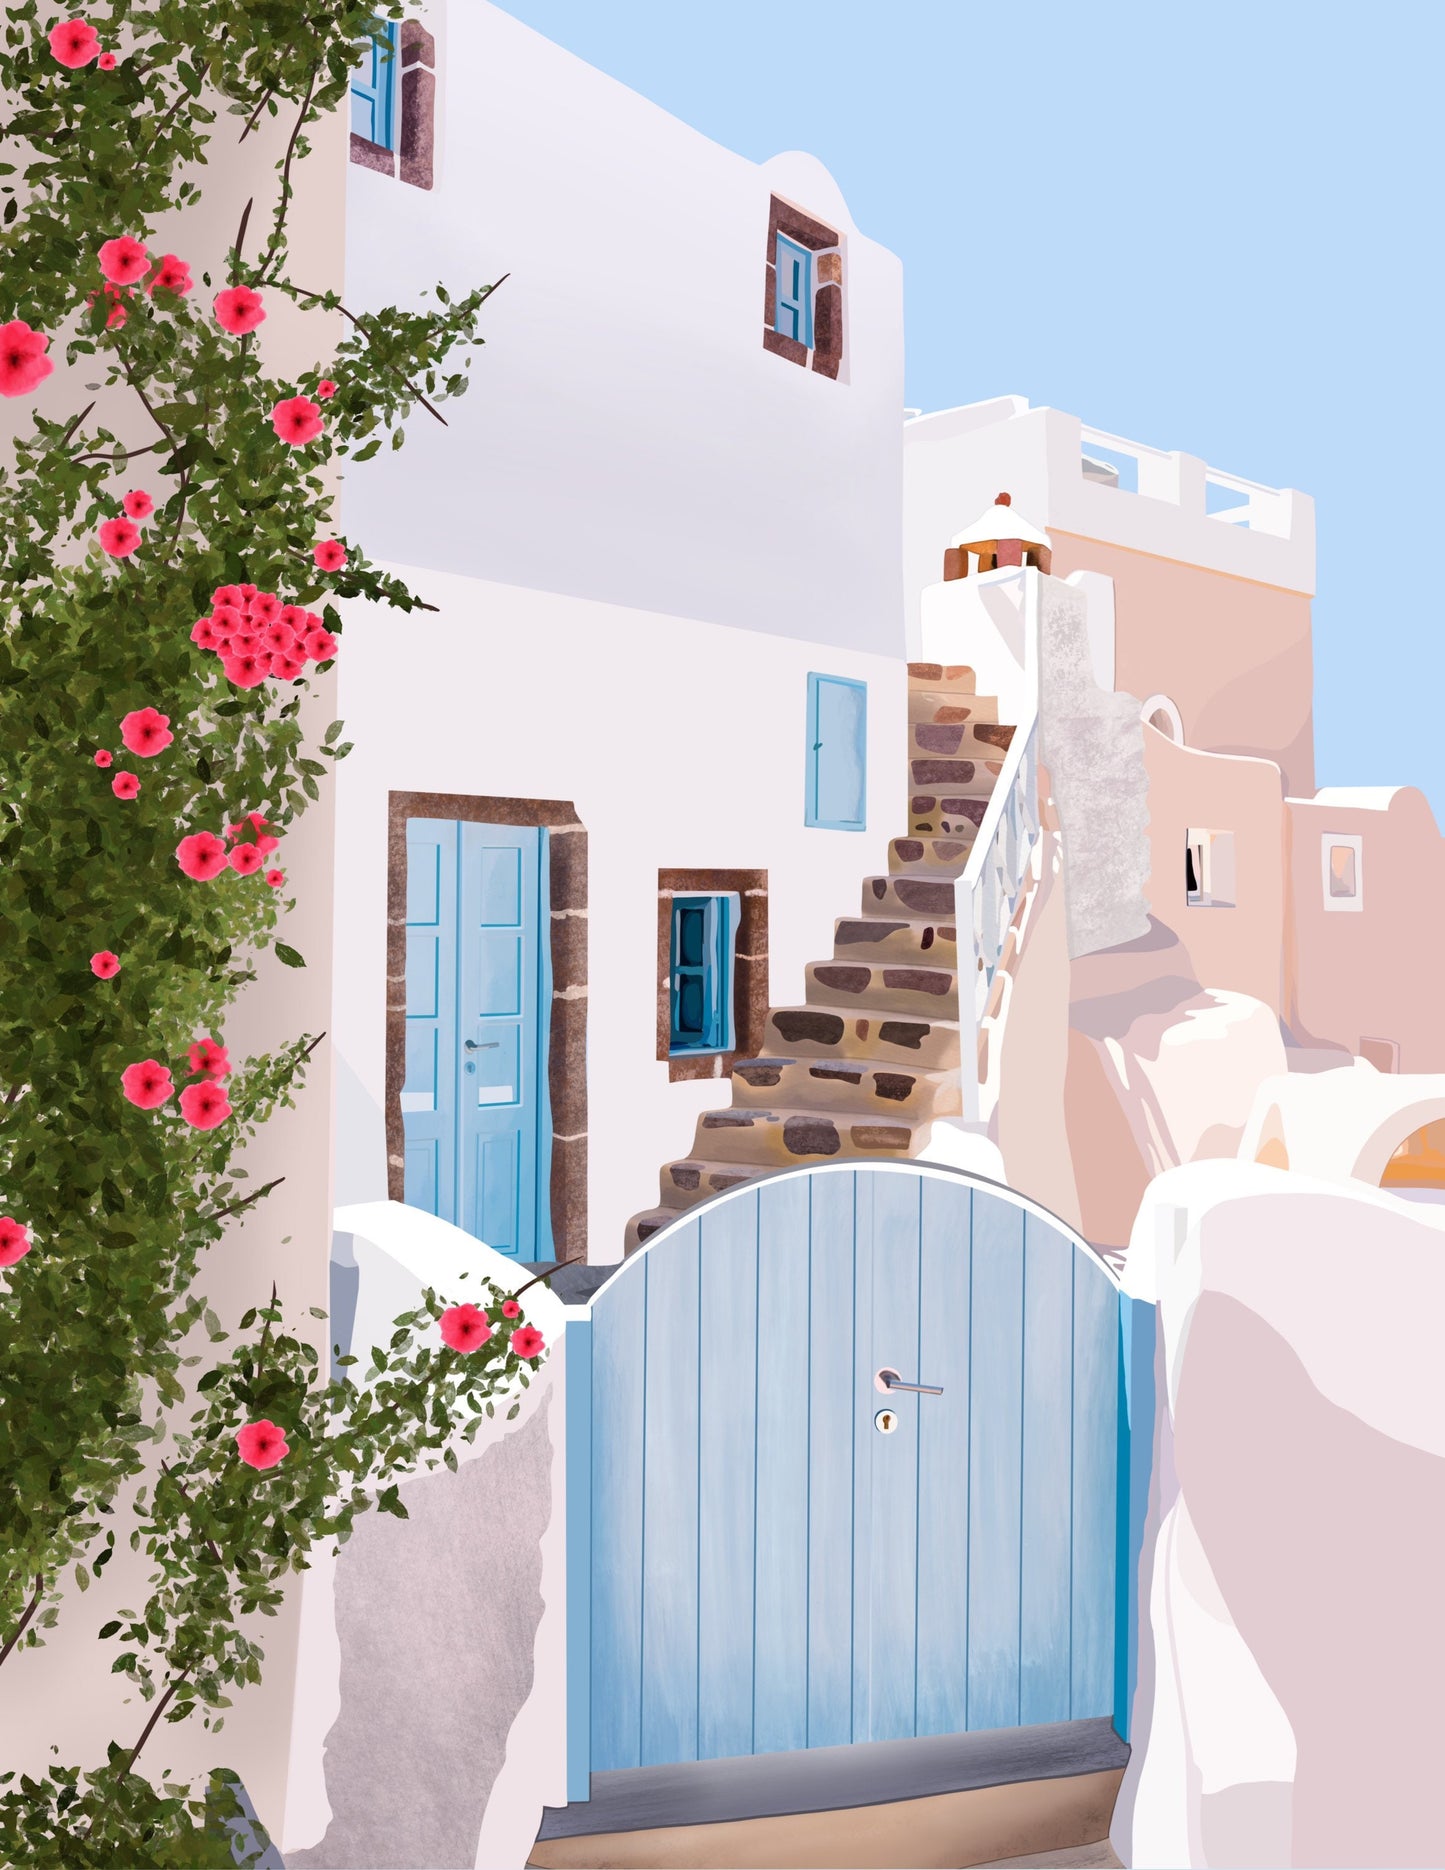 Greece cityscape to make you feel like your roaming around mykonos or santorini - Greece cityscape art print - You can almost feel the warm breeze and the sun on your face when you see the beautiful and calming shades of white, blue, and neutrals/ beige with vibrant green leaves/vines and bright pink/fascia flowers.